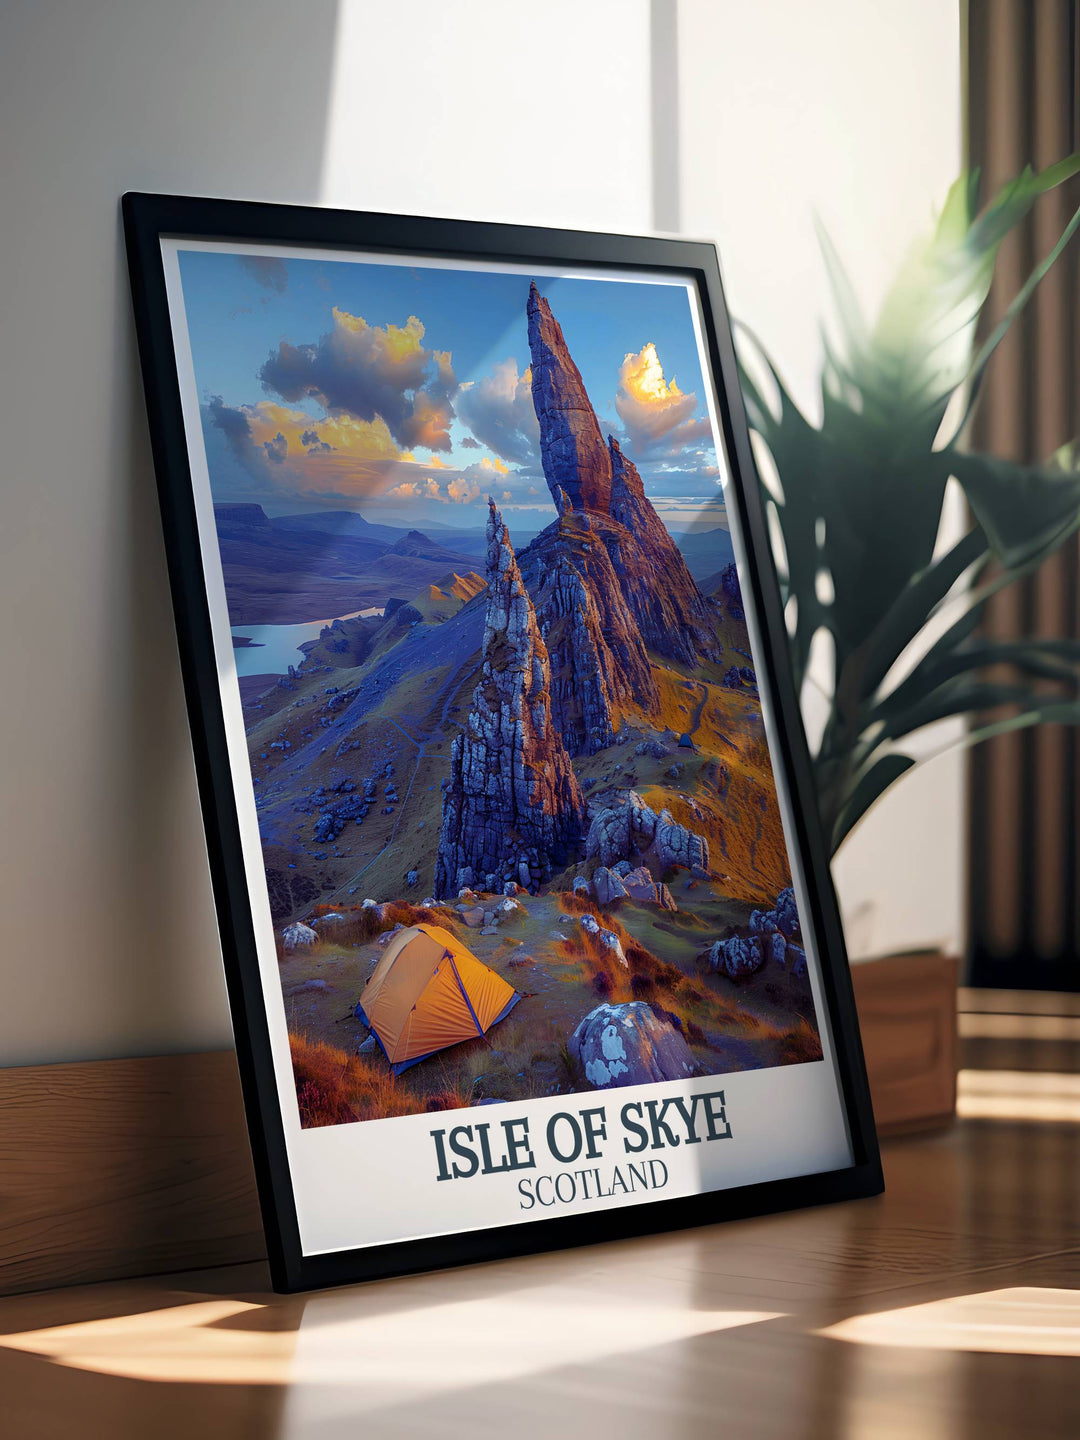 The Old Man of Storr in a detailed art print highlighting the rugged terrain and greenery of the Isle of Skye